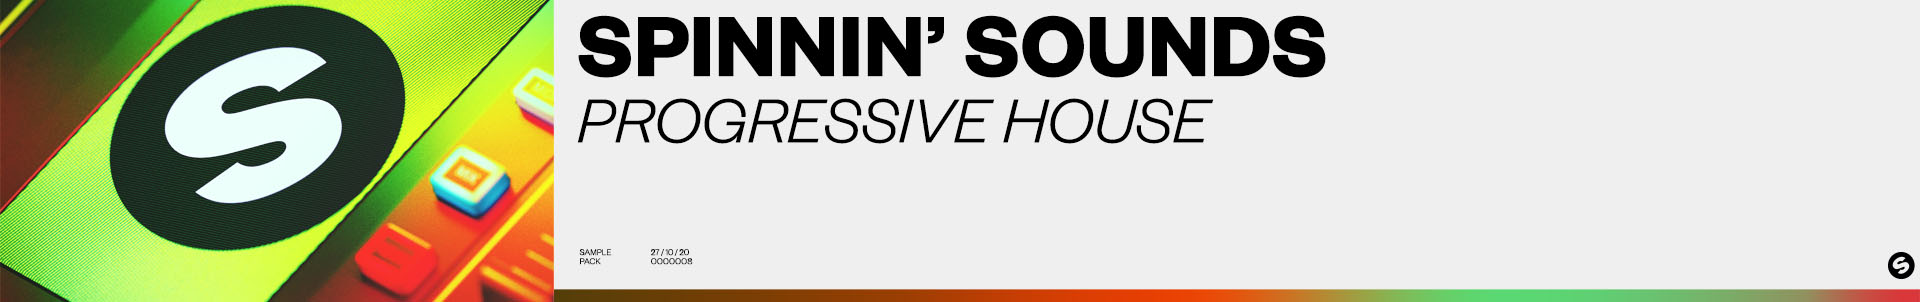 Spinnin' Records and Splice release the Progressive House Sample Pack!